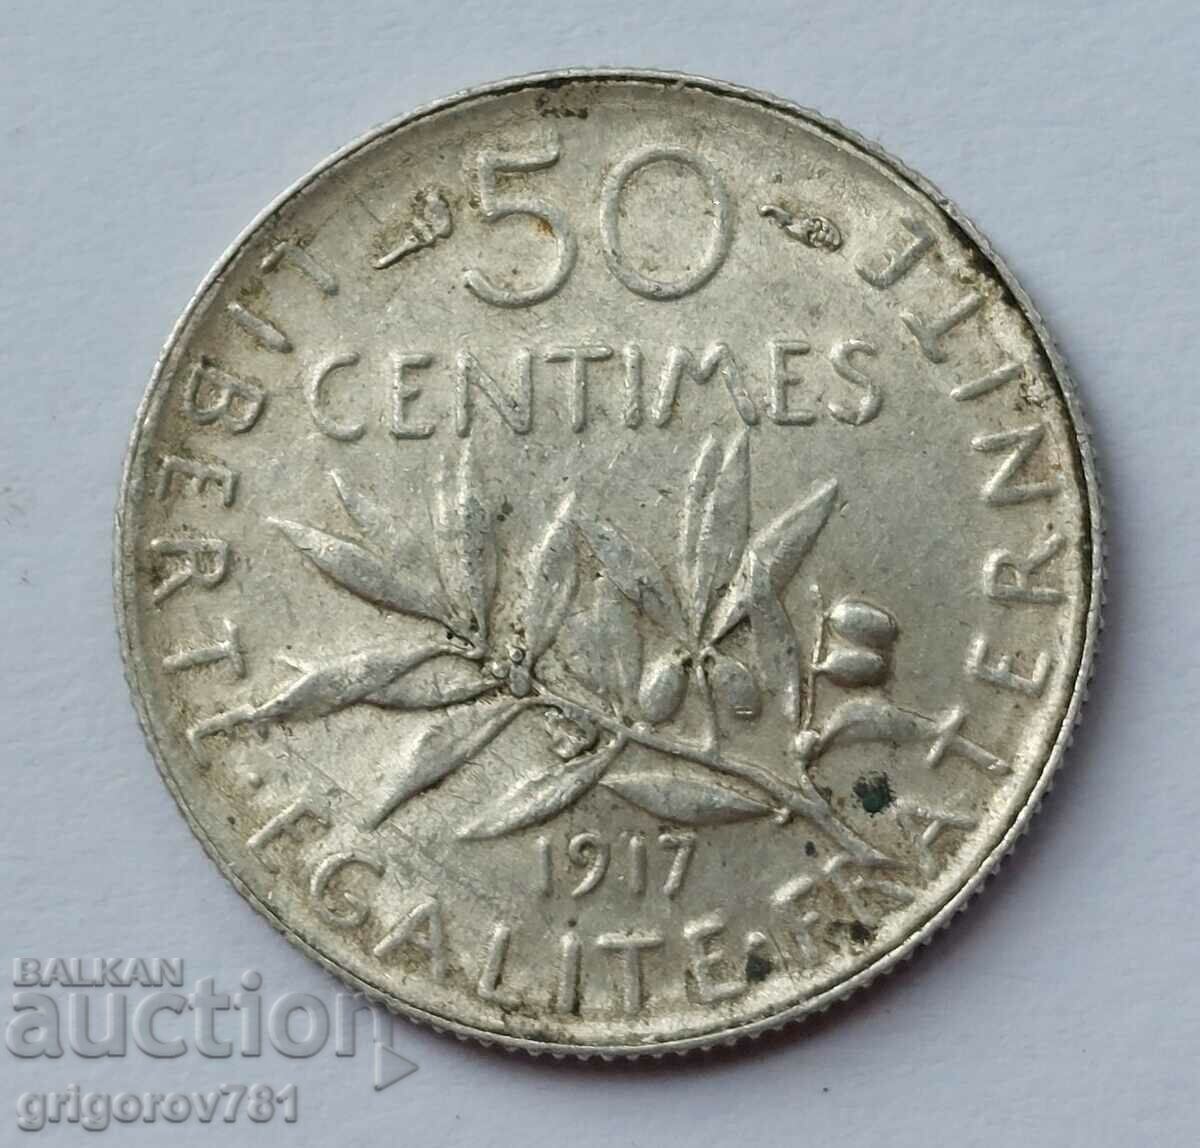 50 centimes silver France 1917 - silver coin №48